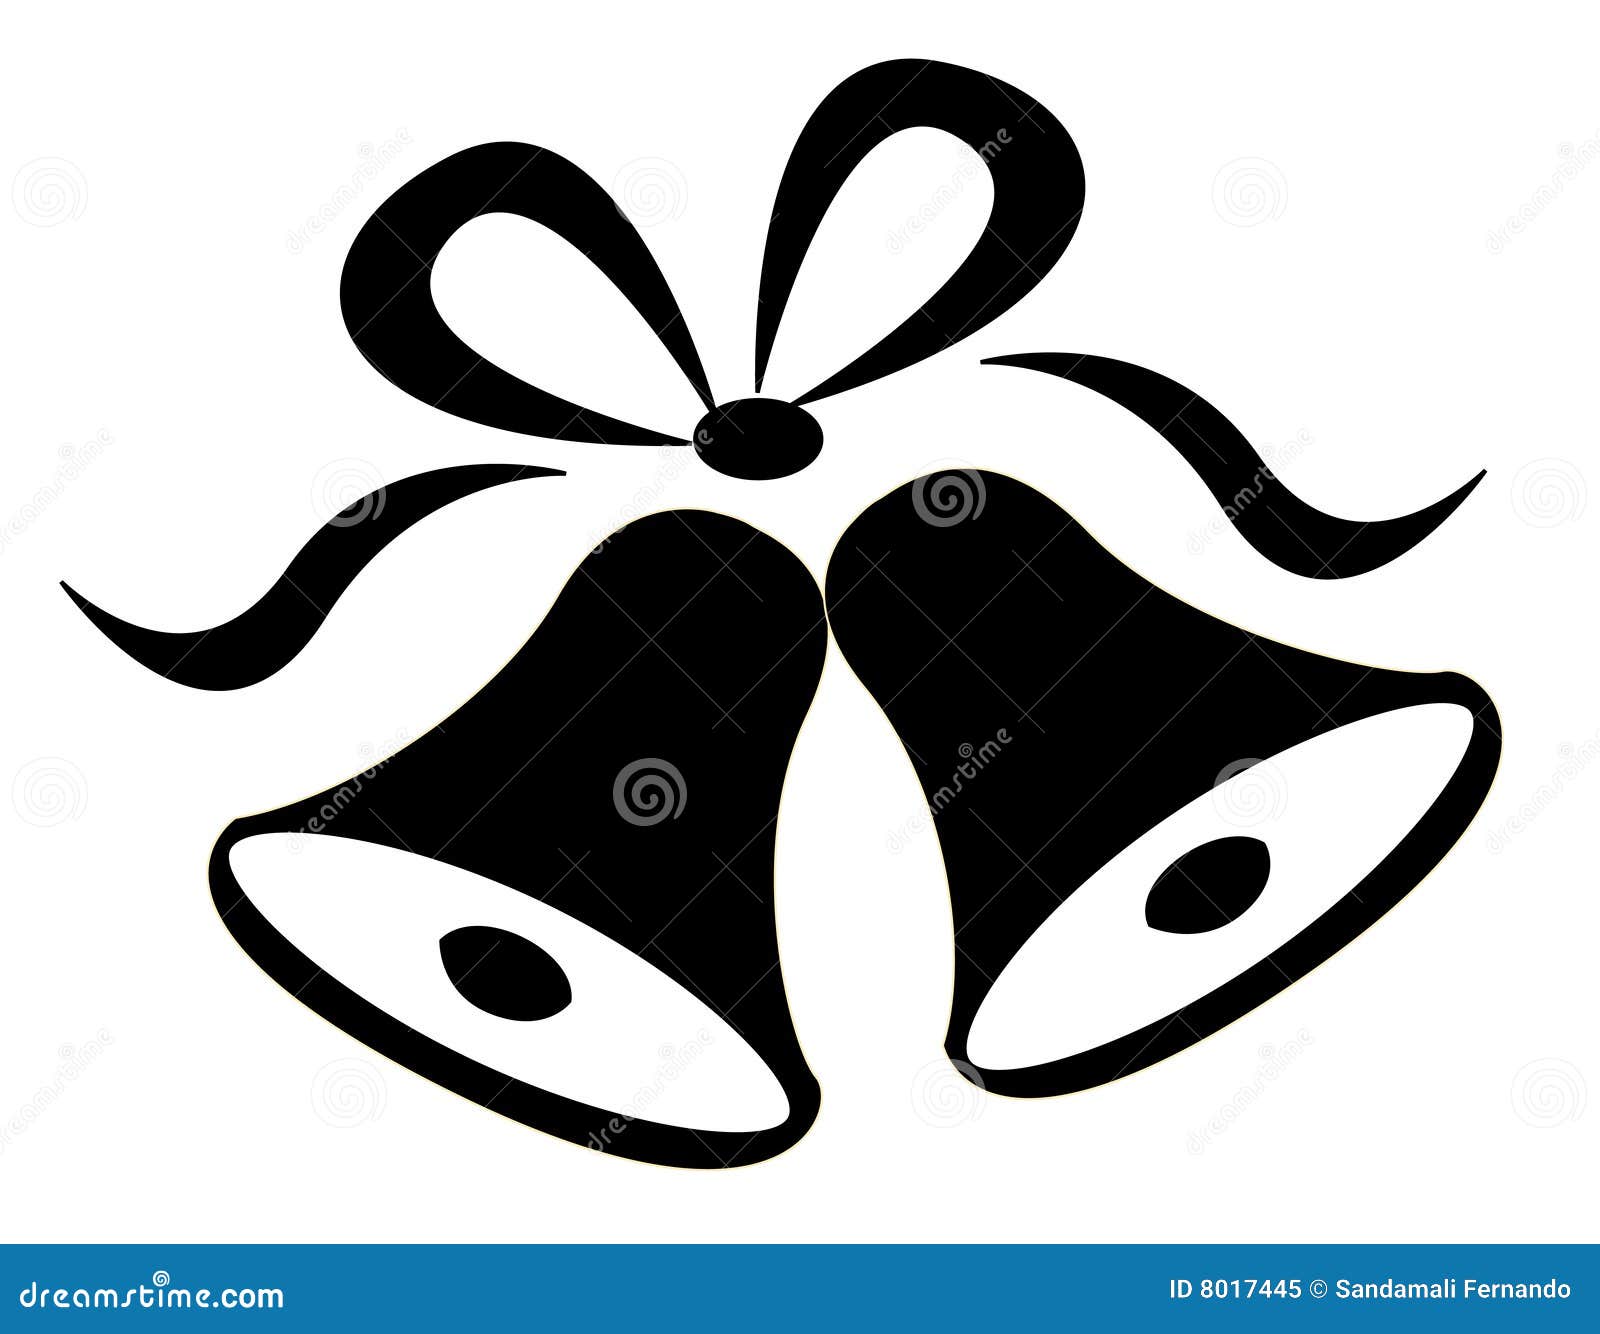 wedding bells clipart black and white free - photo #49